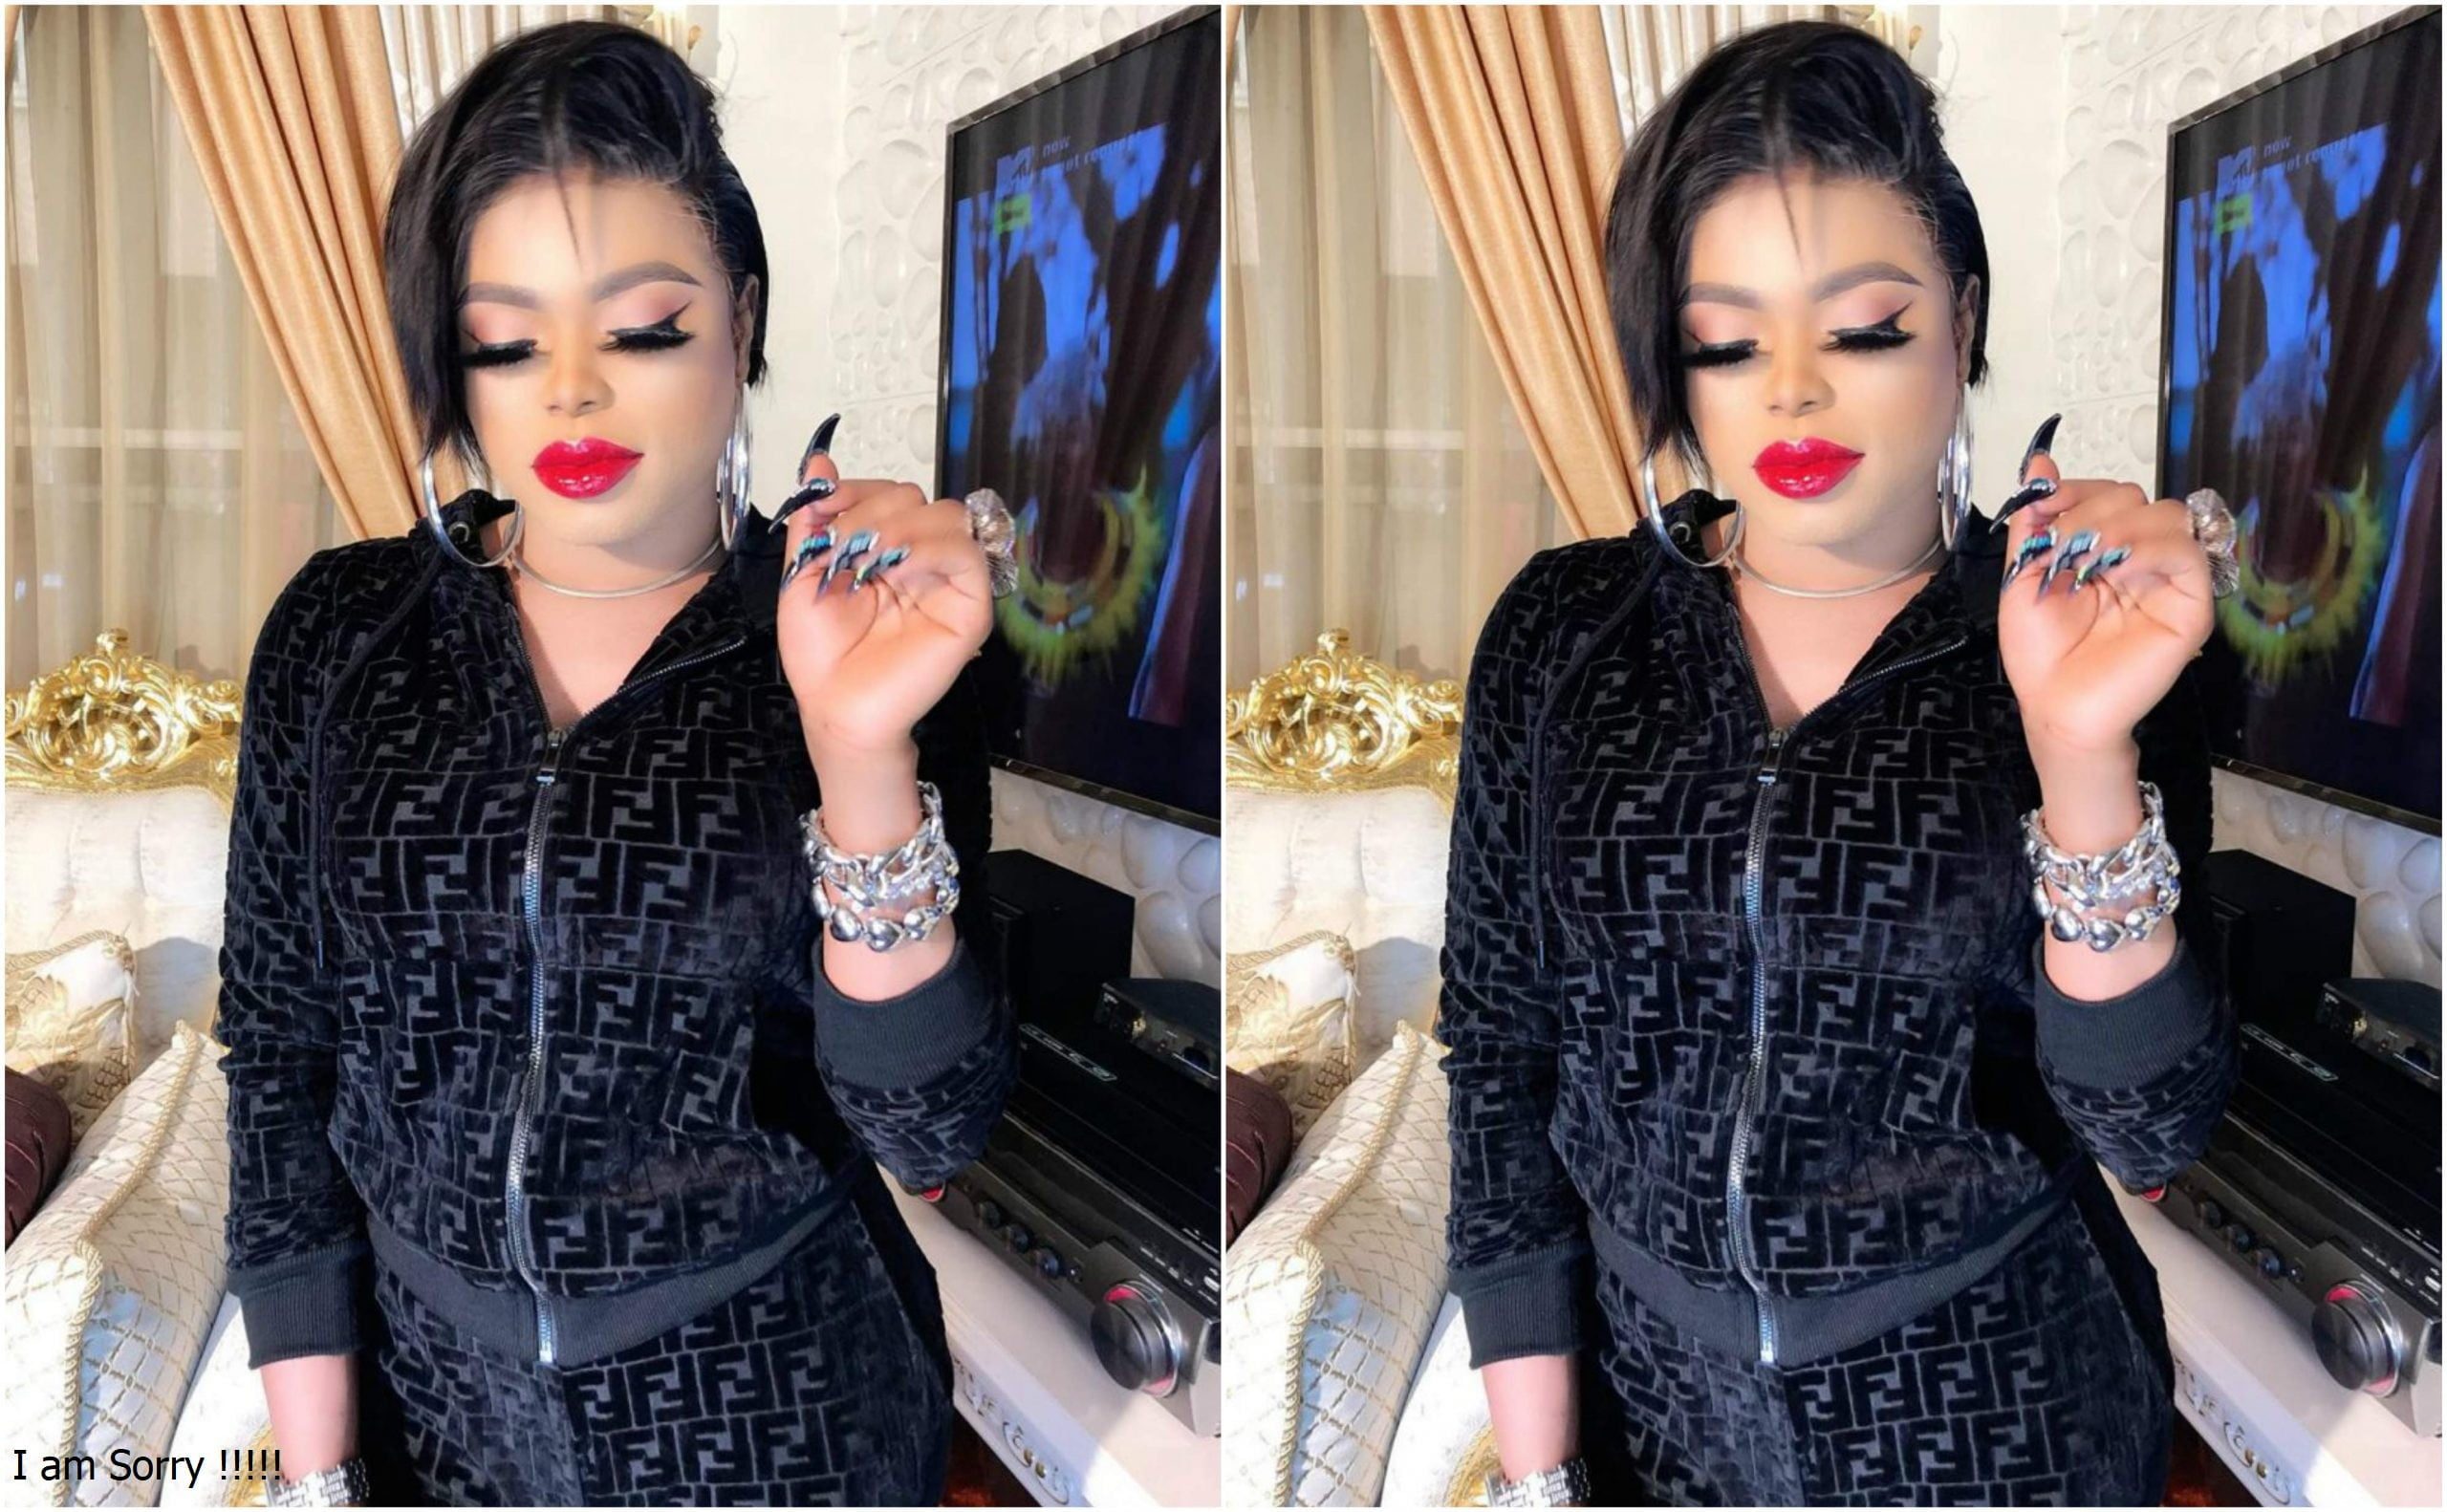 Better Find Yourself A Man Who Can Buy You Range Rover And Stop Hating On Me - Bobrisky Tells Slay Queens